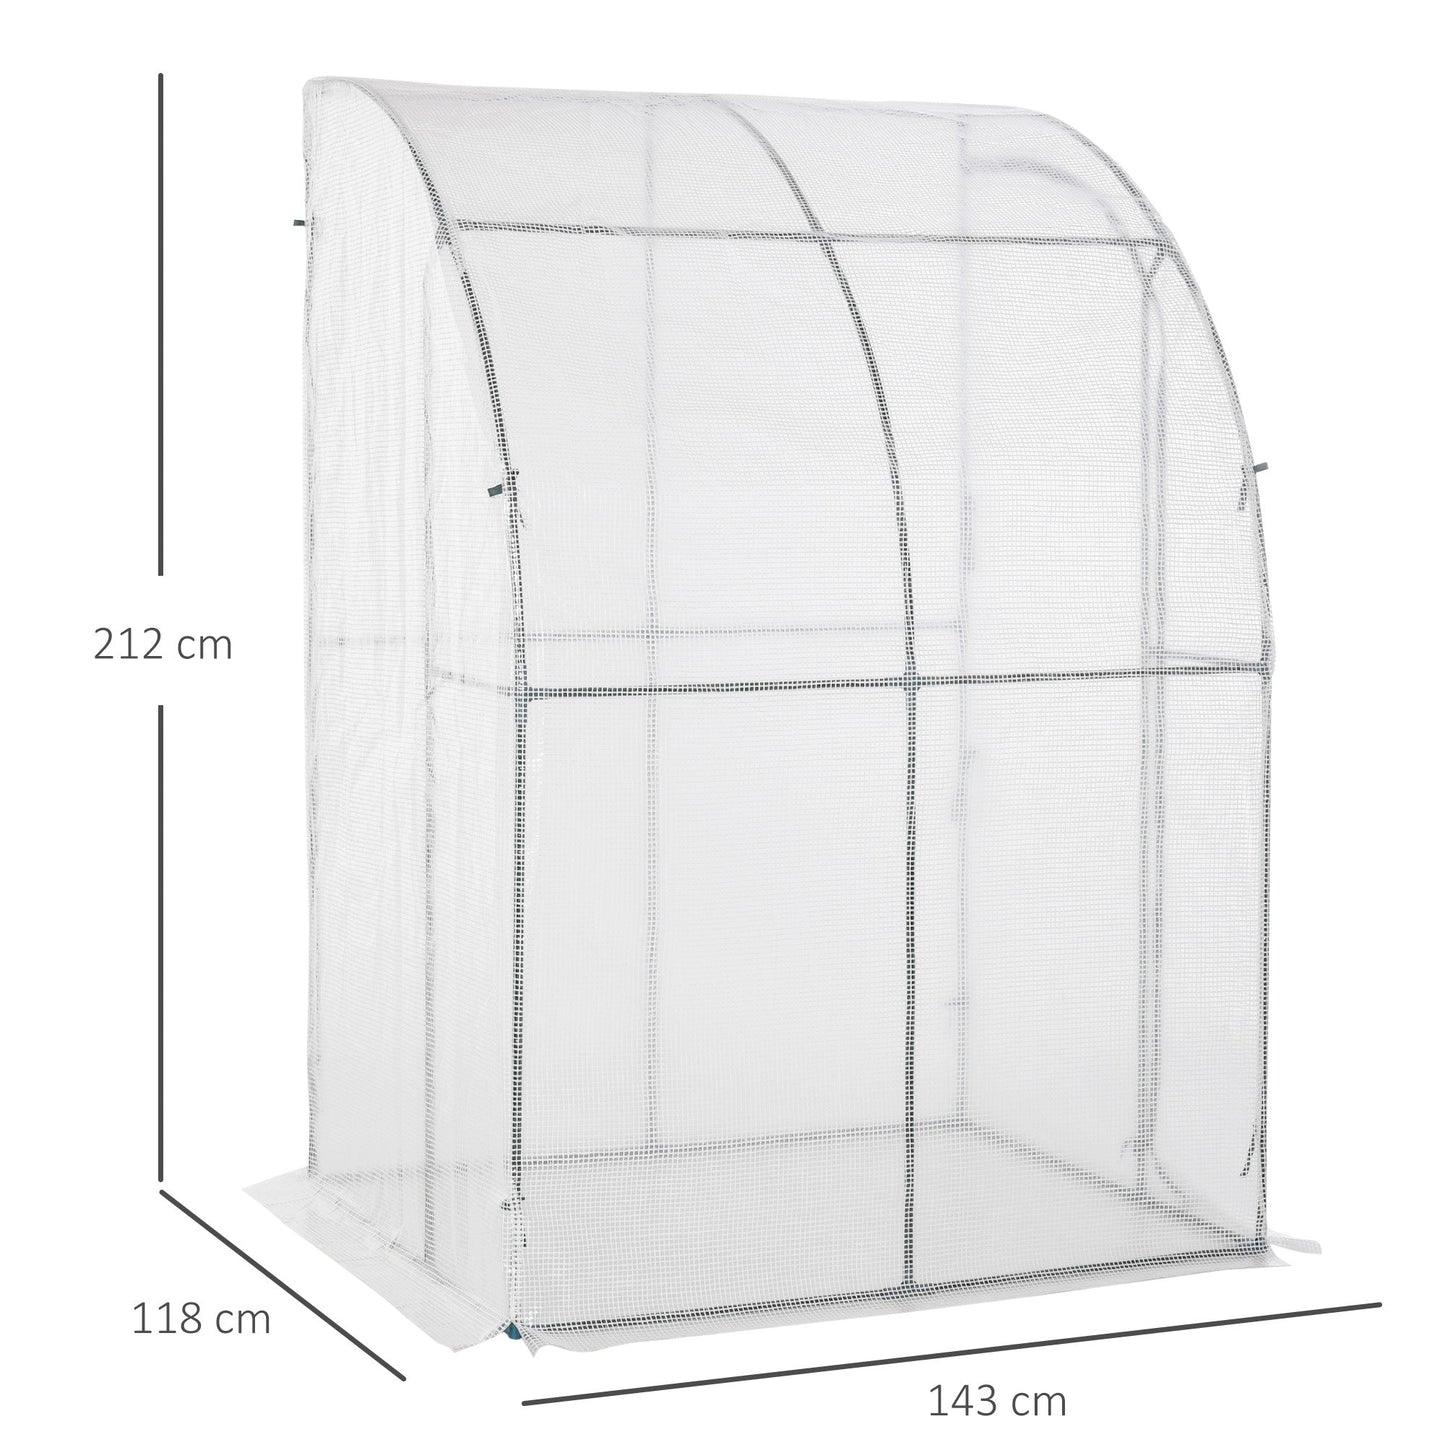 Outsunny Lean-To Greenhouse: Walk-In PE Cover with Zippered Door, 143Lx118Wx212H cm, White Outdoor Growing Space